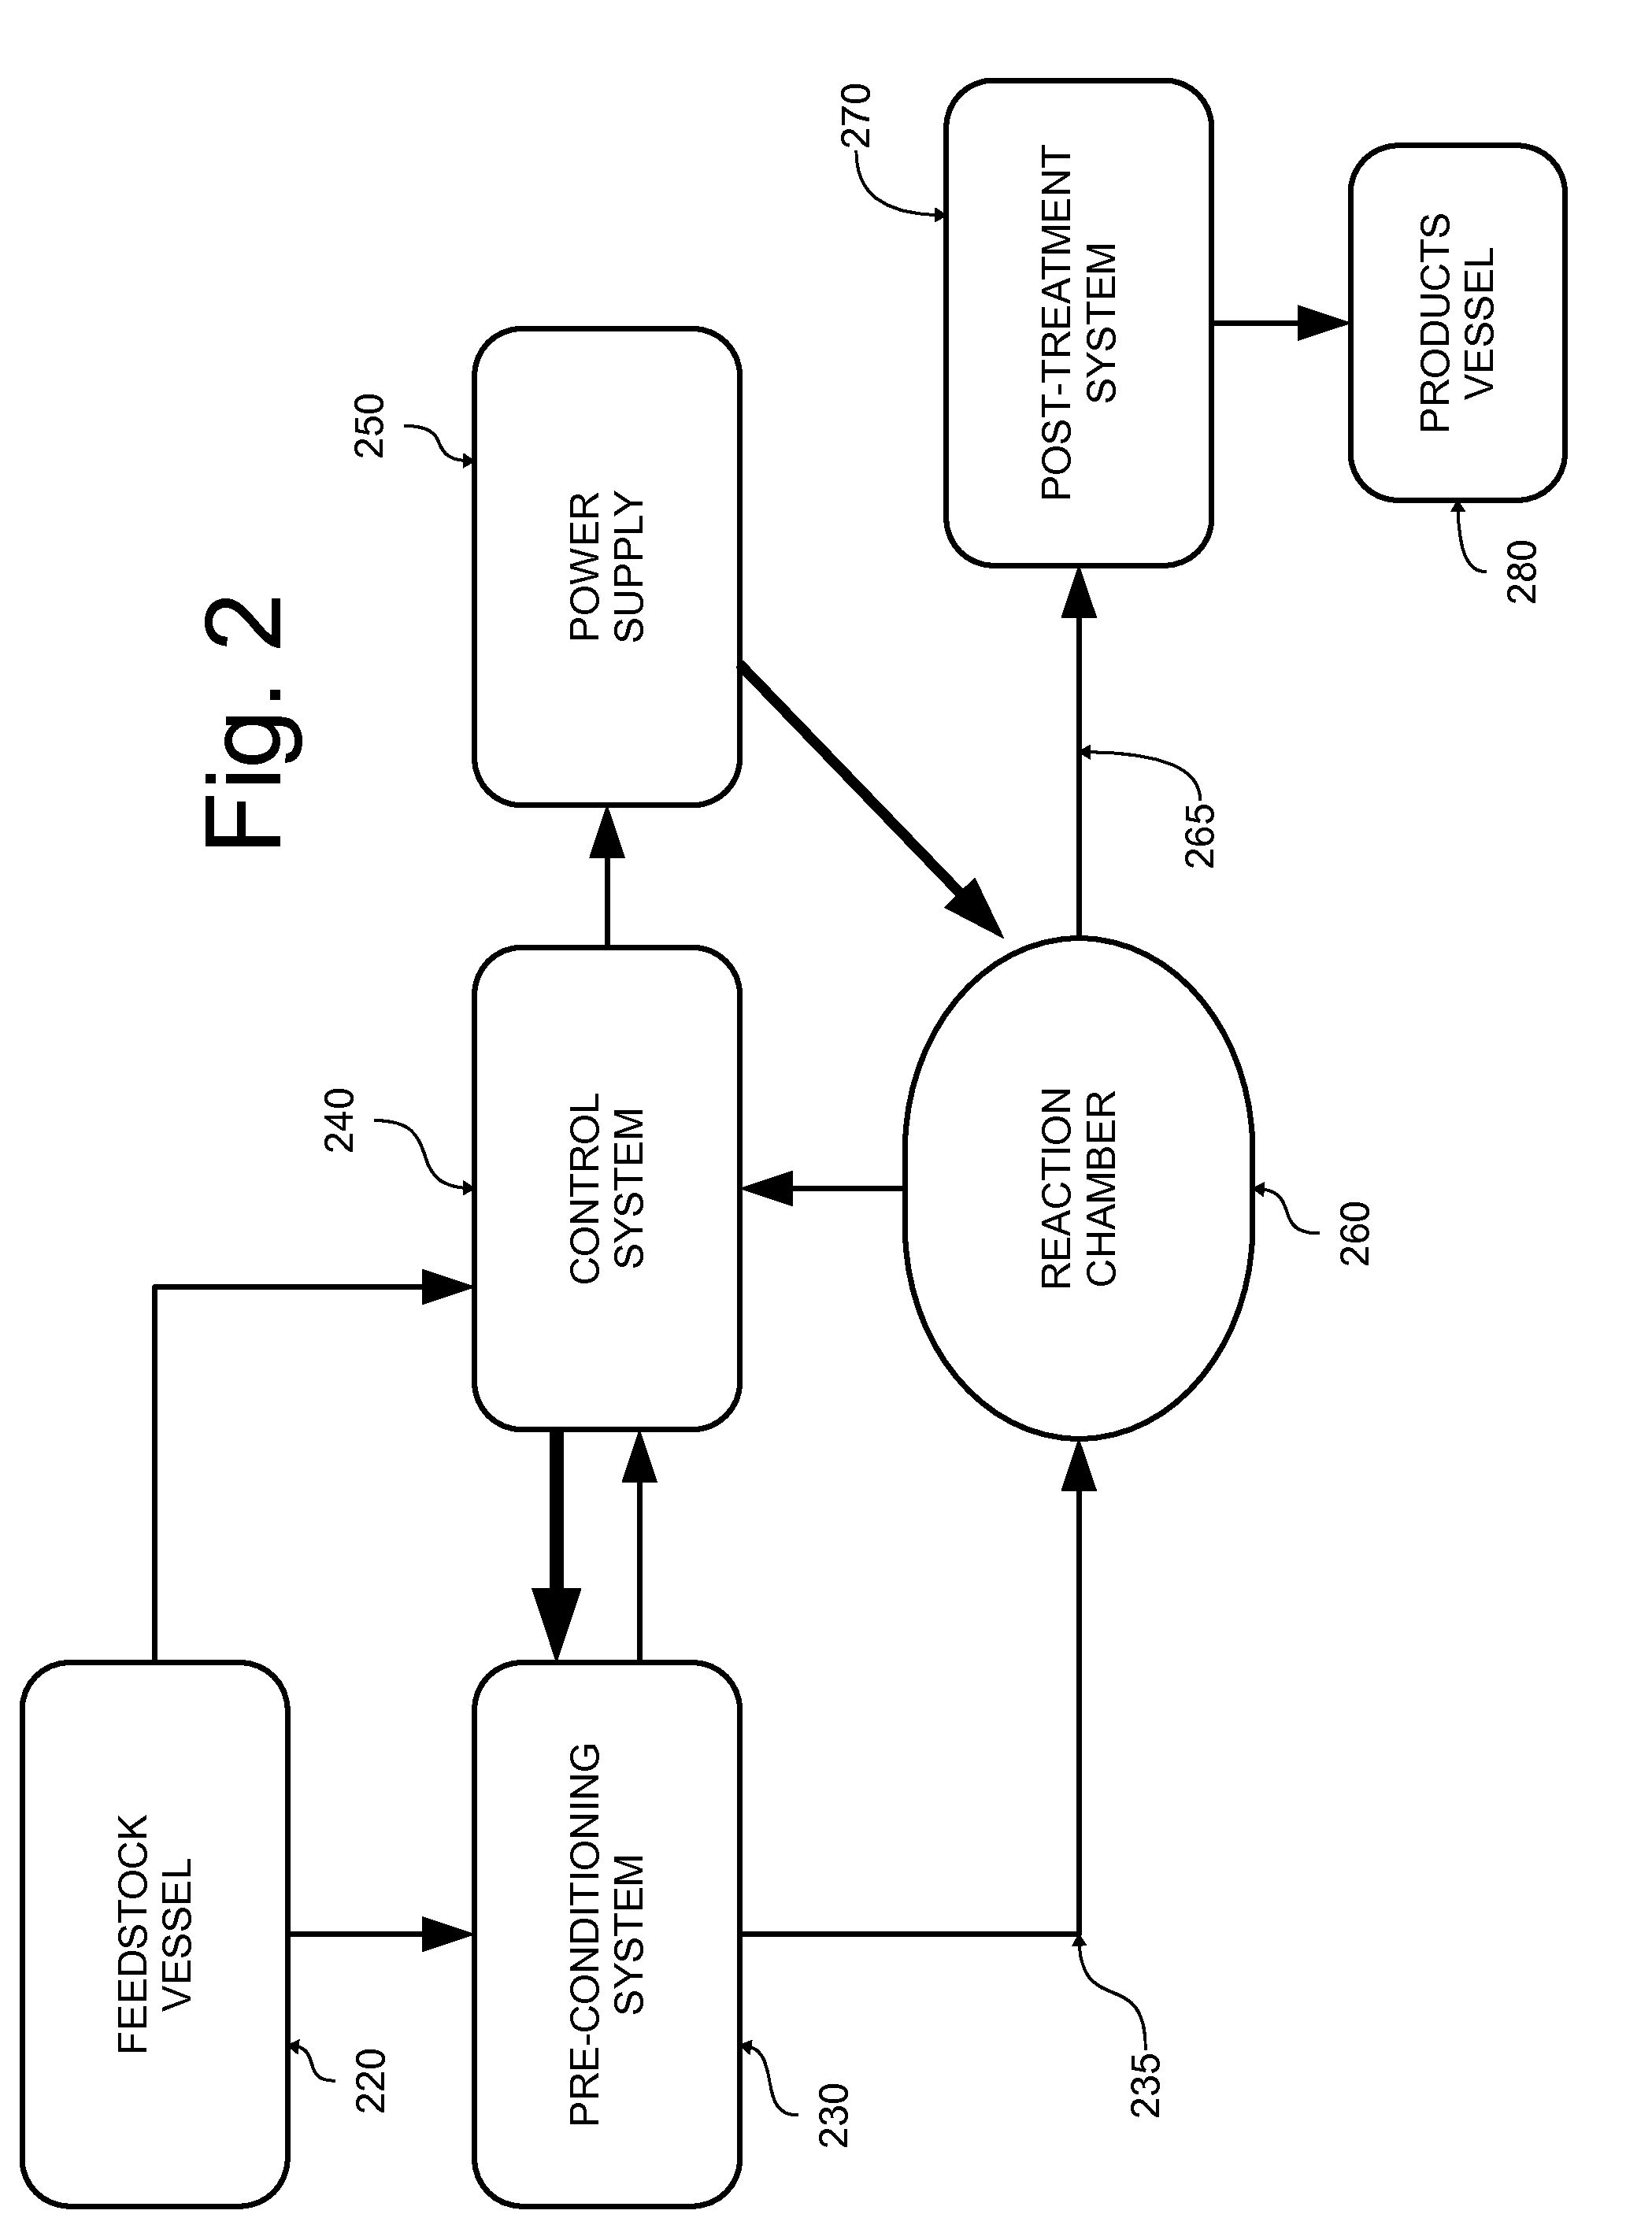 Method and apparatus for applying plasma particles to a liquid and use for disinfecting water